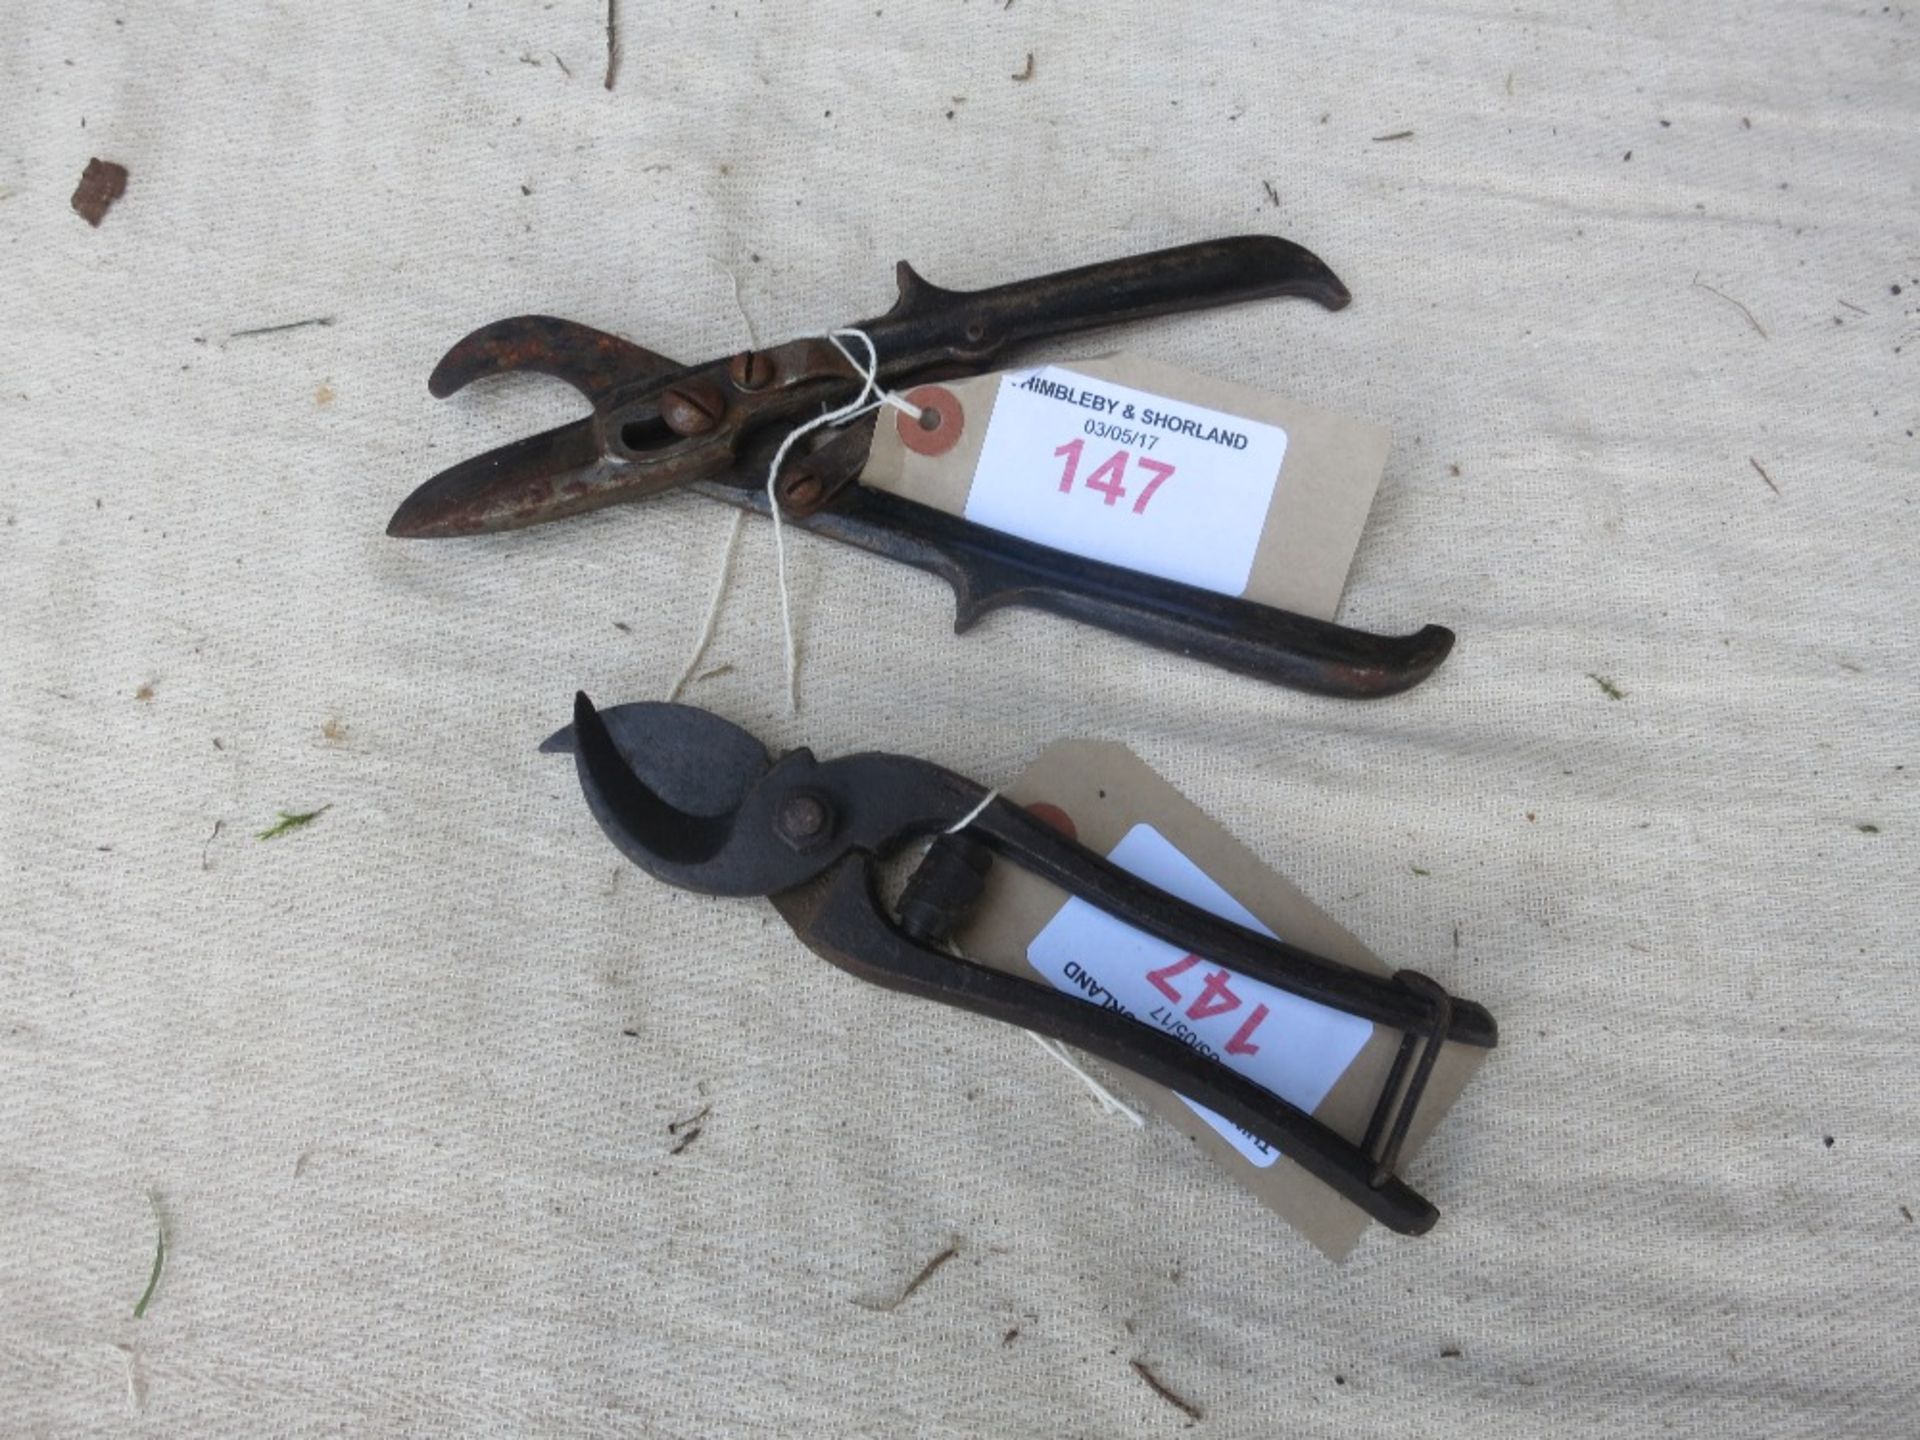 An early pair of Wilkinson Sword secateurs and 1 other